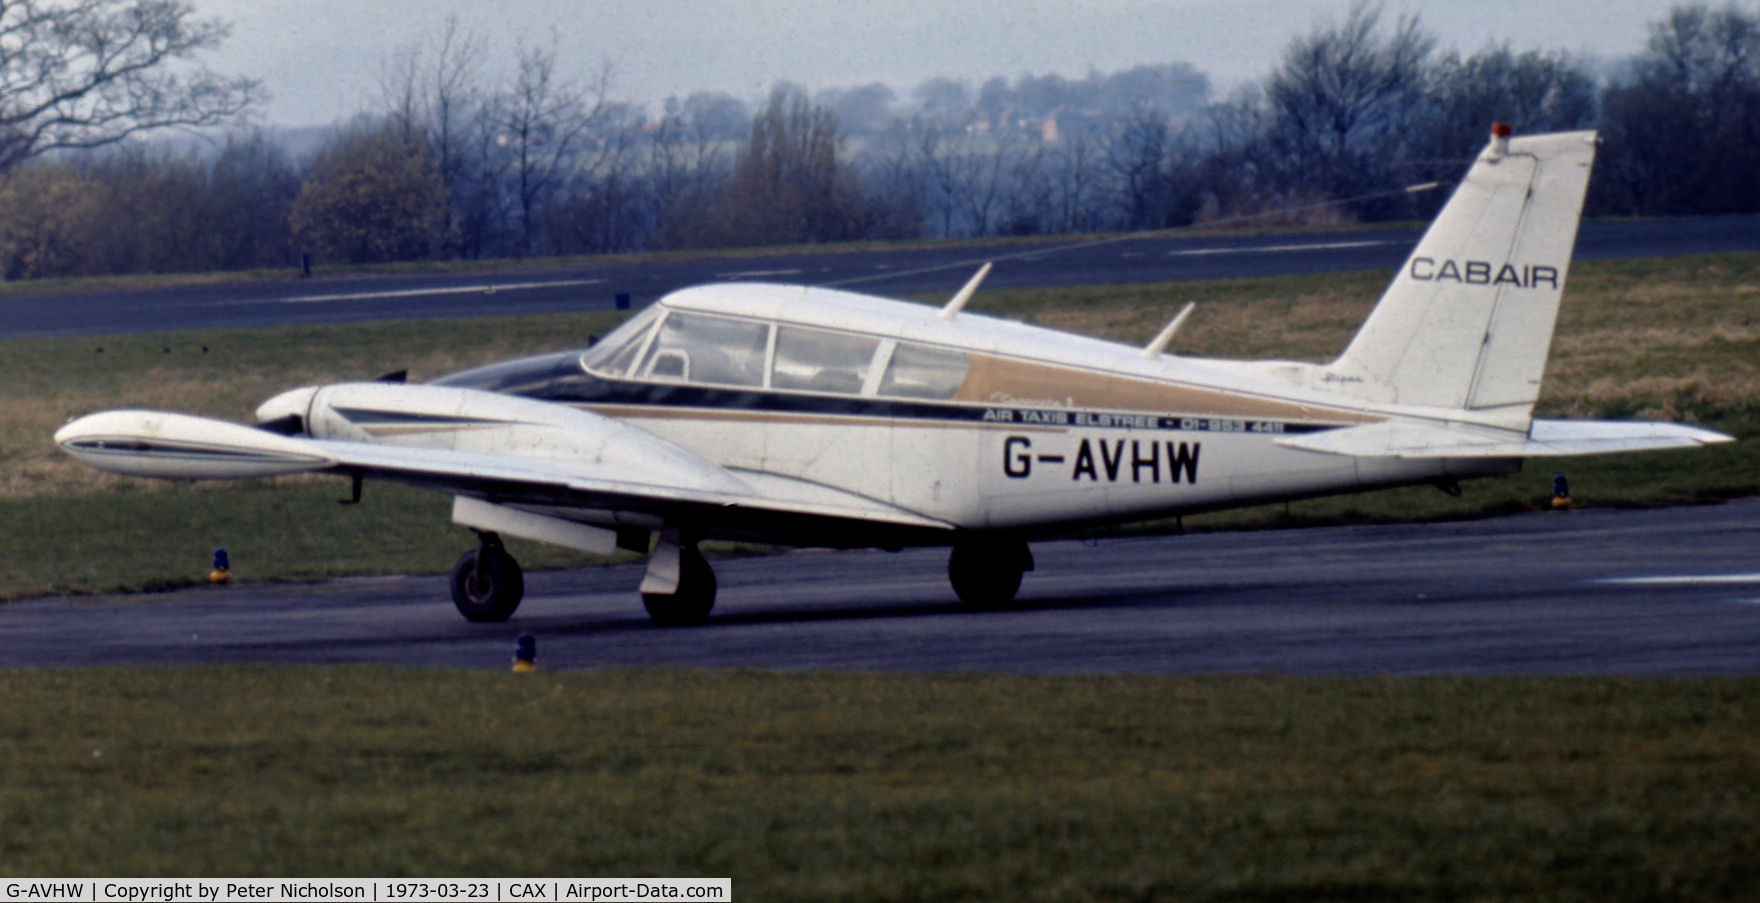 G-AVHW, 1966 Piper PA-30-160 B Twin Comanche C/N 30-1414, PA-30 Twin Comanche 160 of Cabair on a visit to Carlisle in the Spring of 1973.